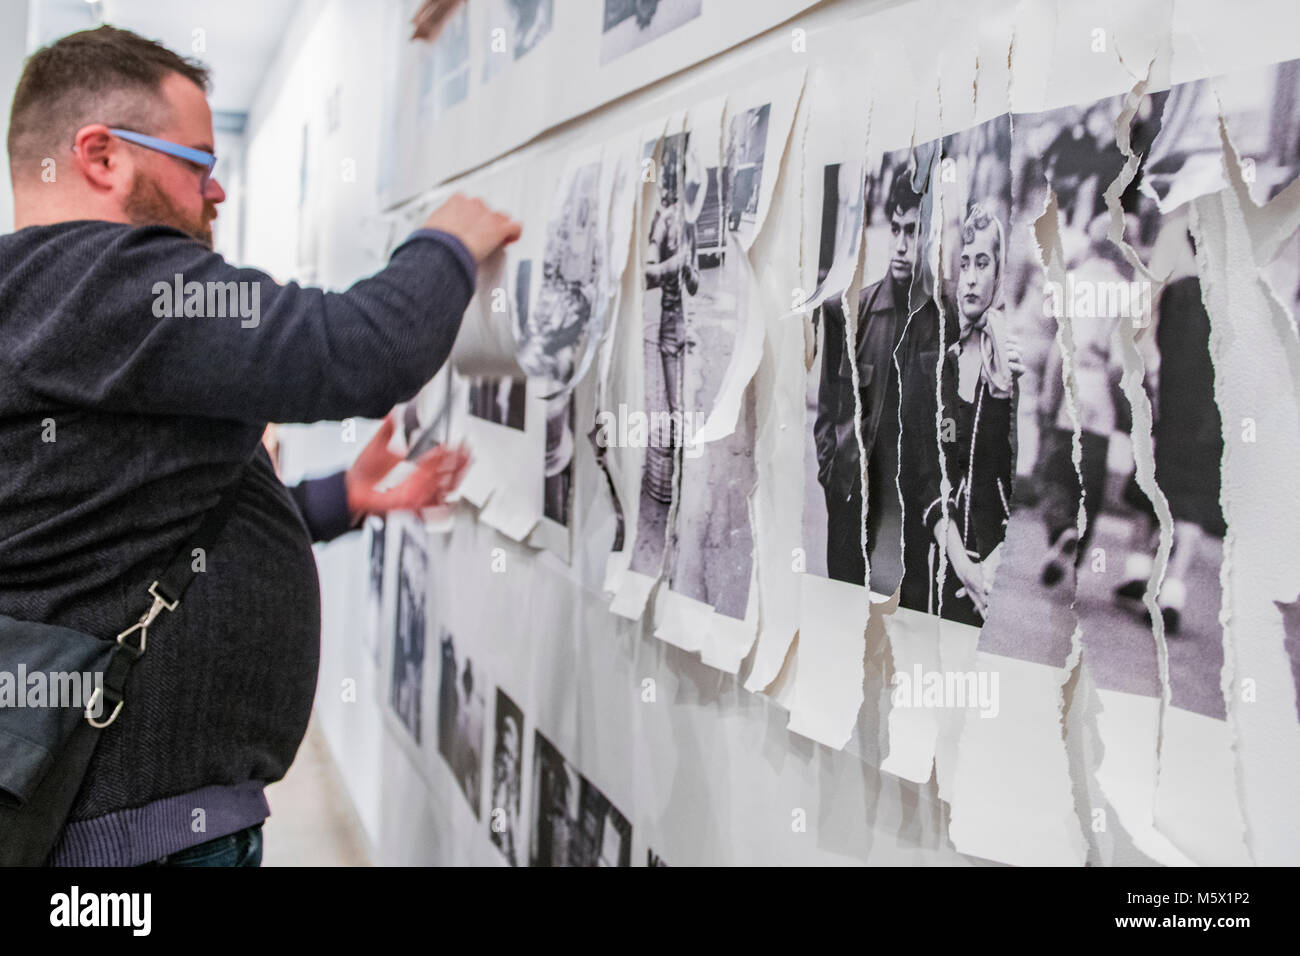 Portland, Oregon, USA. 26 FEB, 2018. The photographer Robert Frank's work from his ground breaking book 'The Americans' hangs  defaced as a gallery goer shreds it at Blue Sky Gallery in Portland, Oregon, USA. The work was destroyed in a “Destruction Dance” performance defacing the photographs with ink and mutilation with scissors, knives and even ice skates  at the end of it’s run. The destruction was Frank's protest regarding today's greed in the global art market. Credit: Ken Hawkins/Alamy Live News Stock Photo